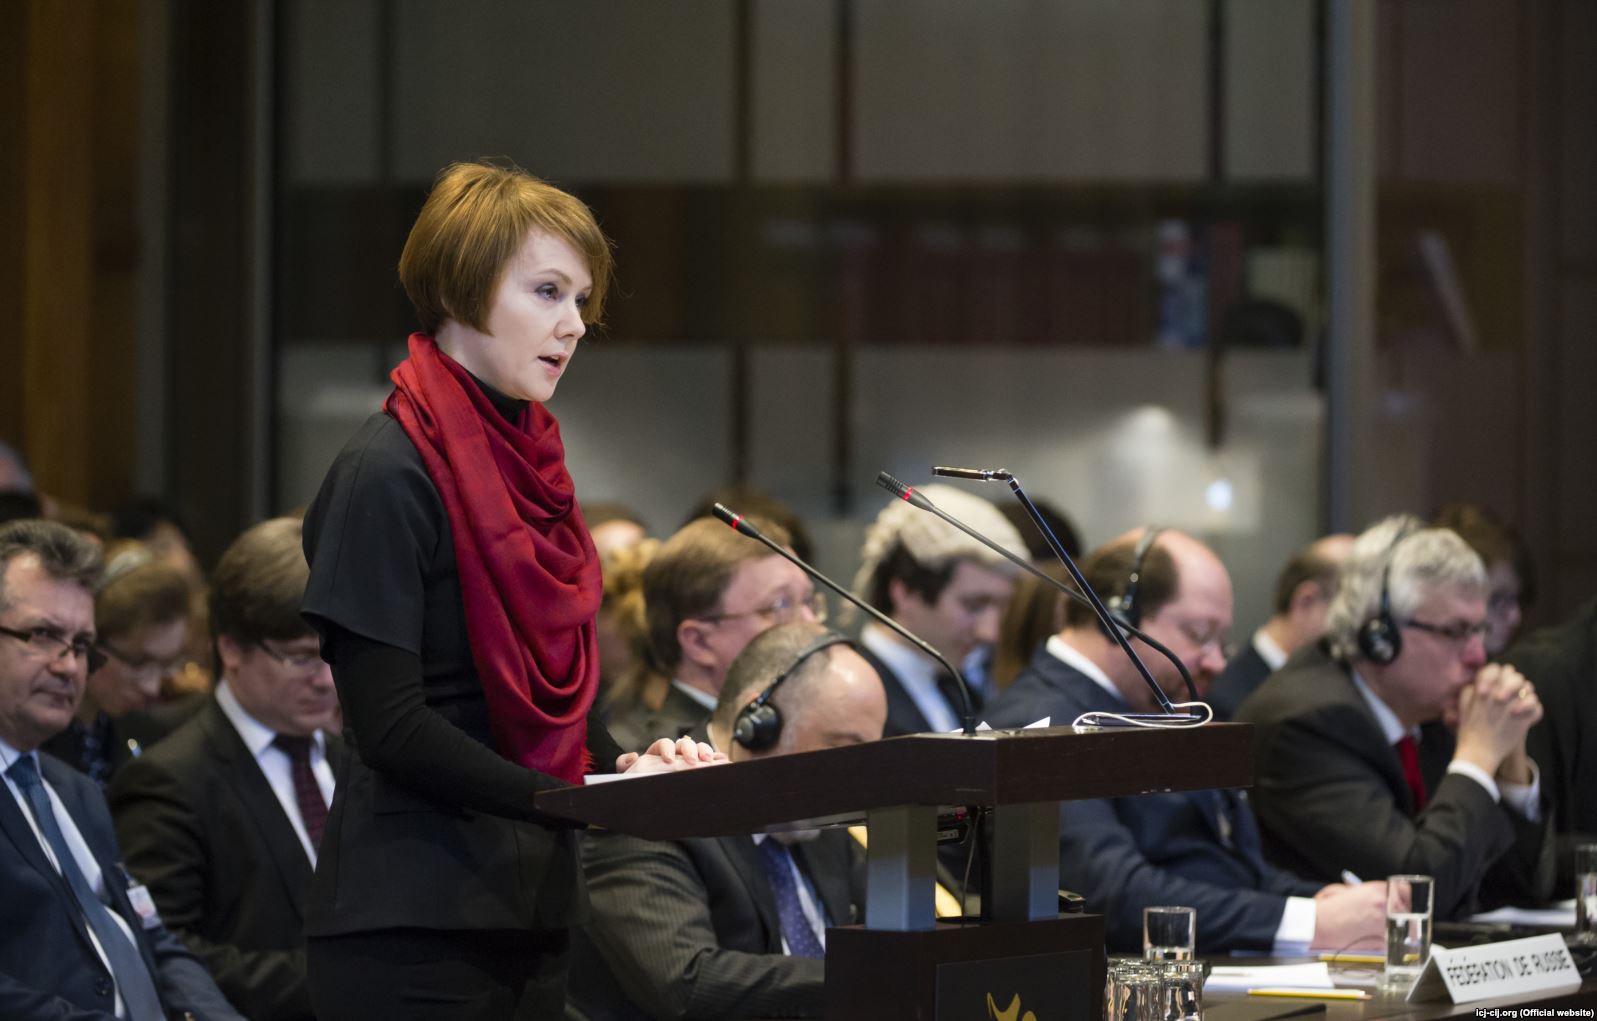 Ukrainian Vice-Minister for Foreign Affairs Olena Zerkal during a session of the United Nations International Court examining litigation against Russia. The Hague, 6 March 2017.